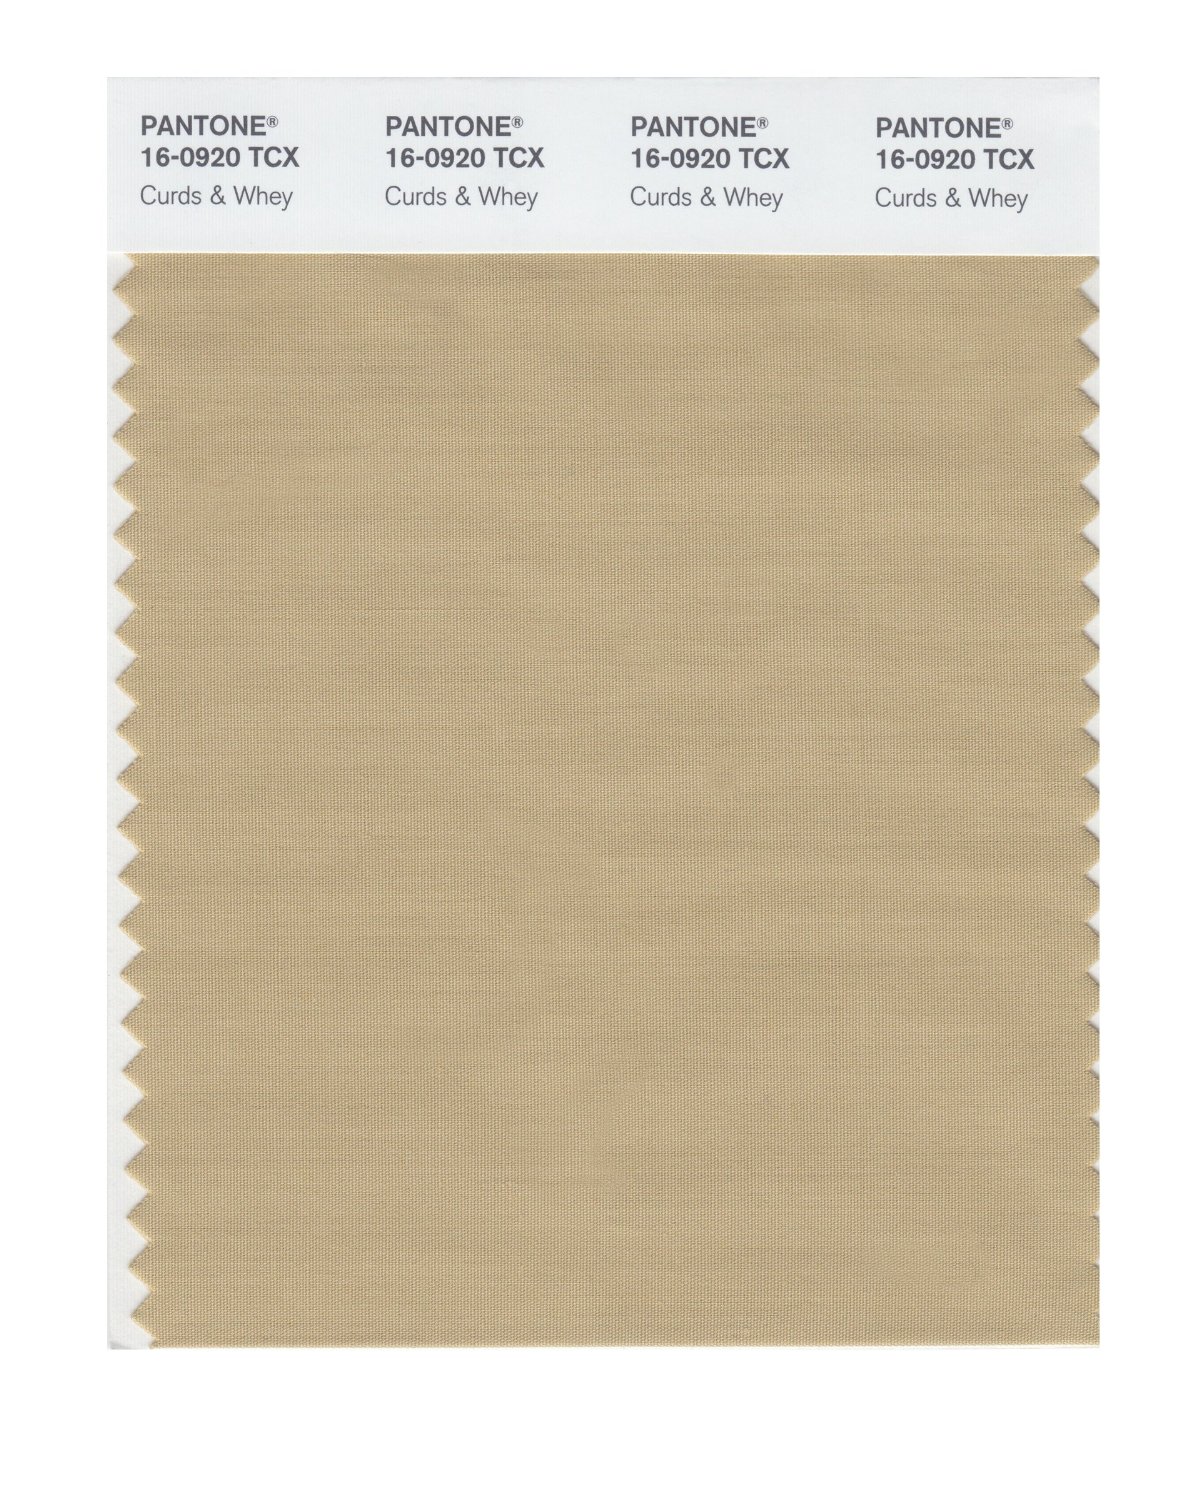 Pantone Cotton Swatch 16-0920 Curds & Whey